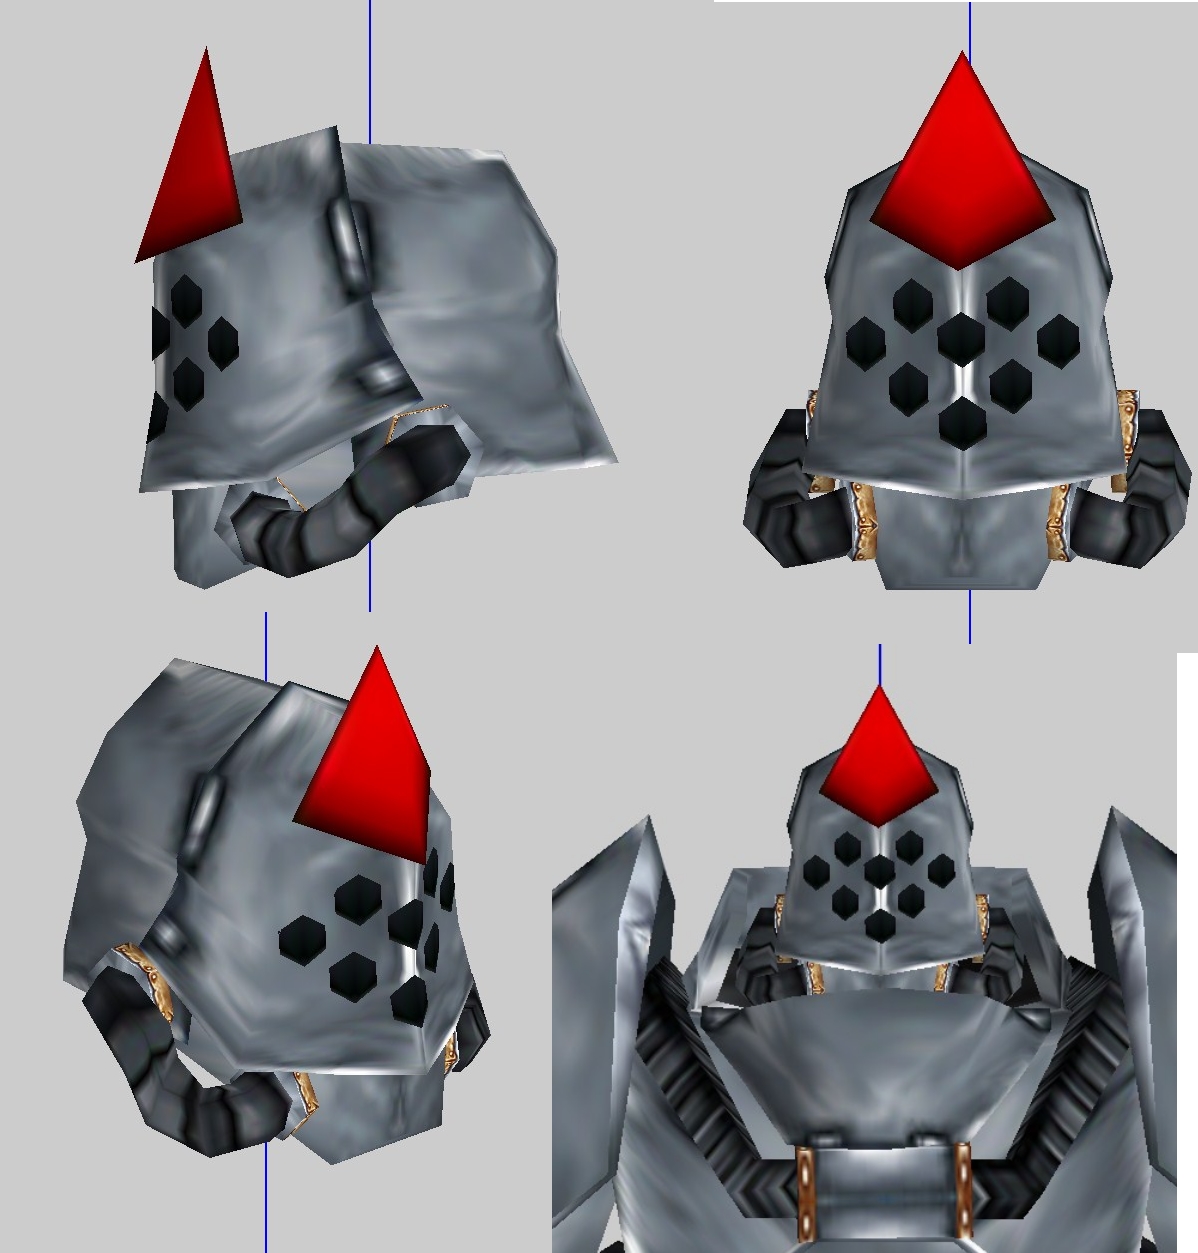 Second helmet variation. Any suggestions?